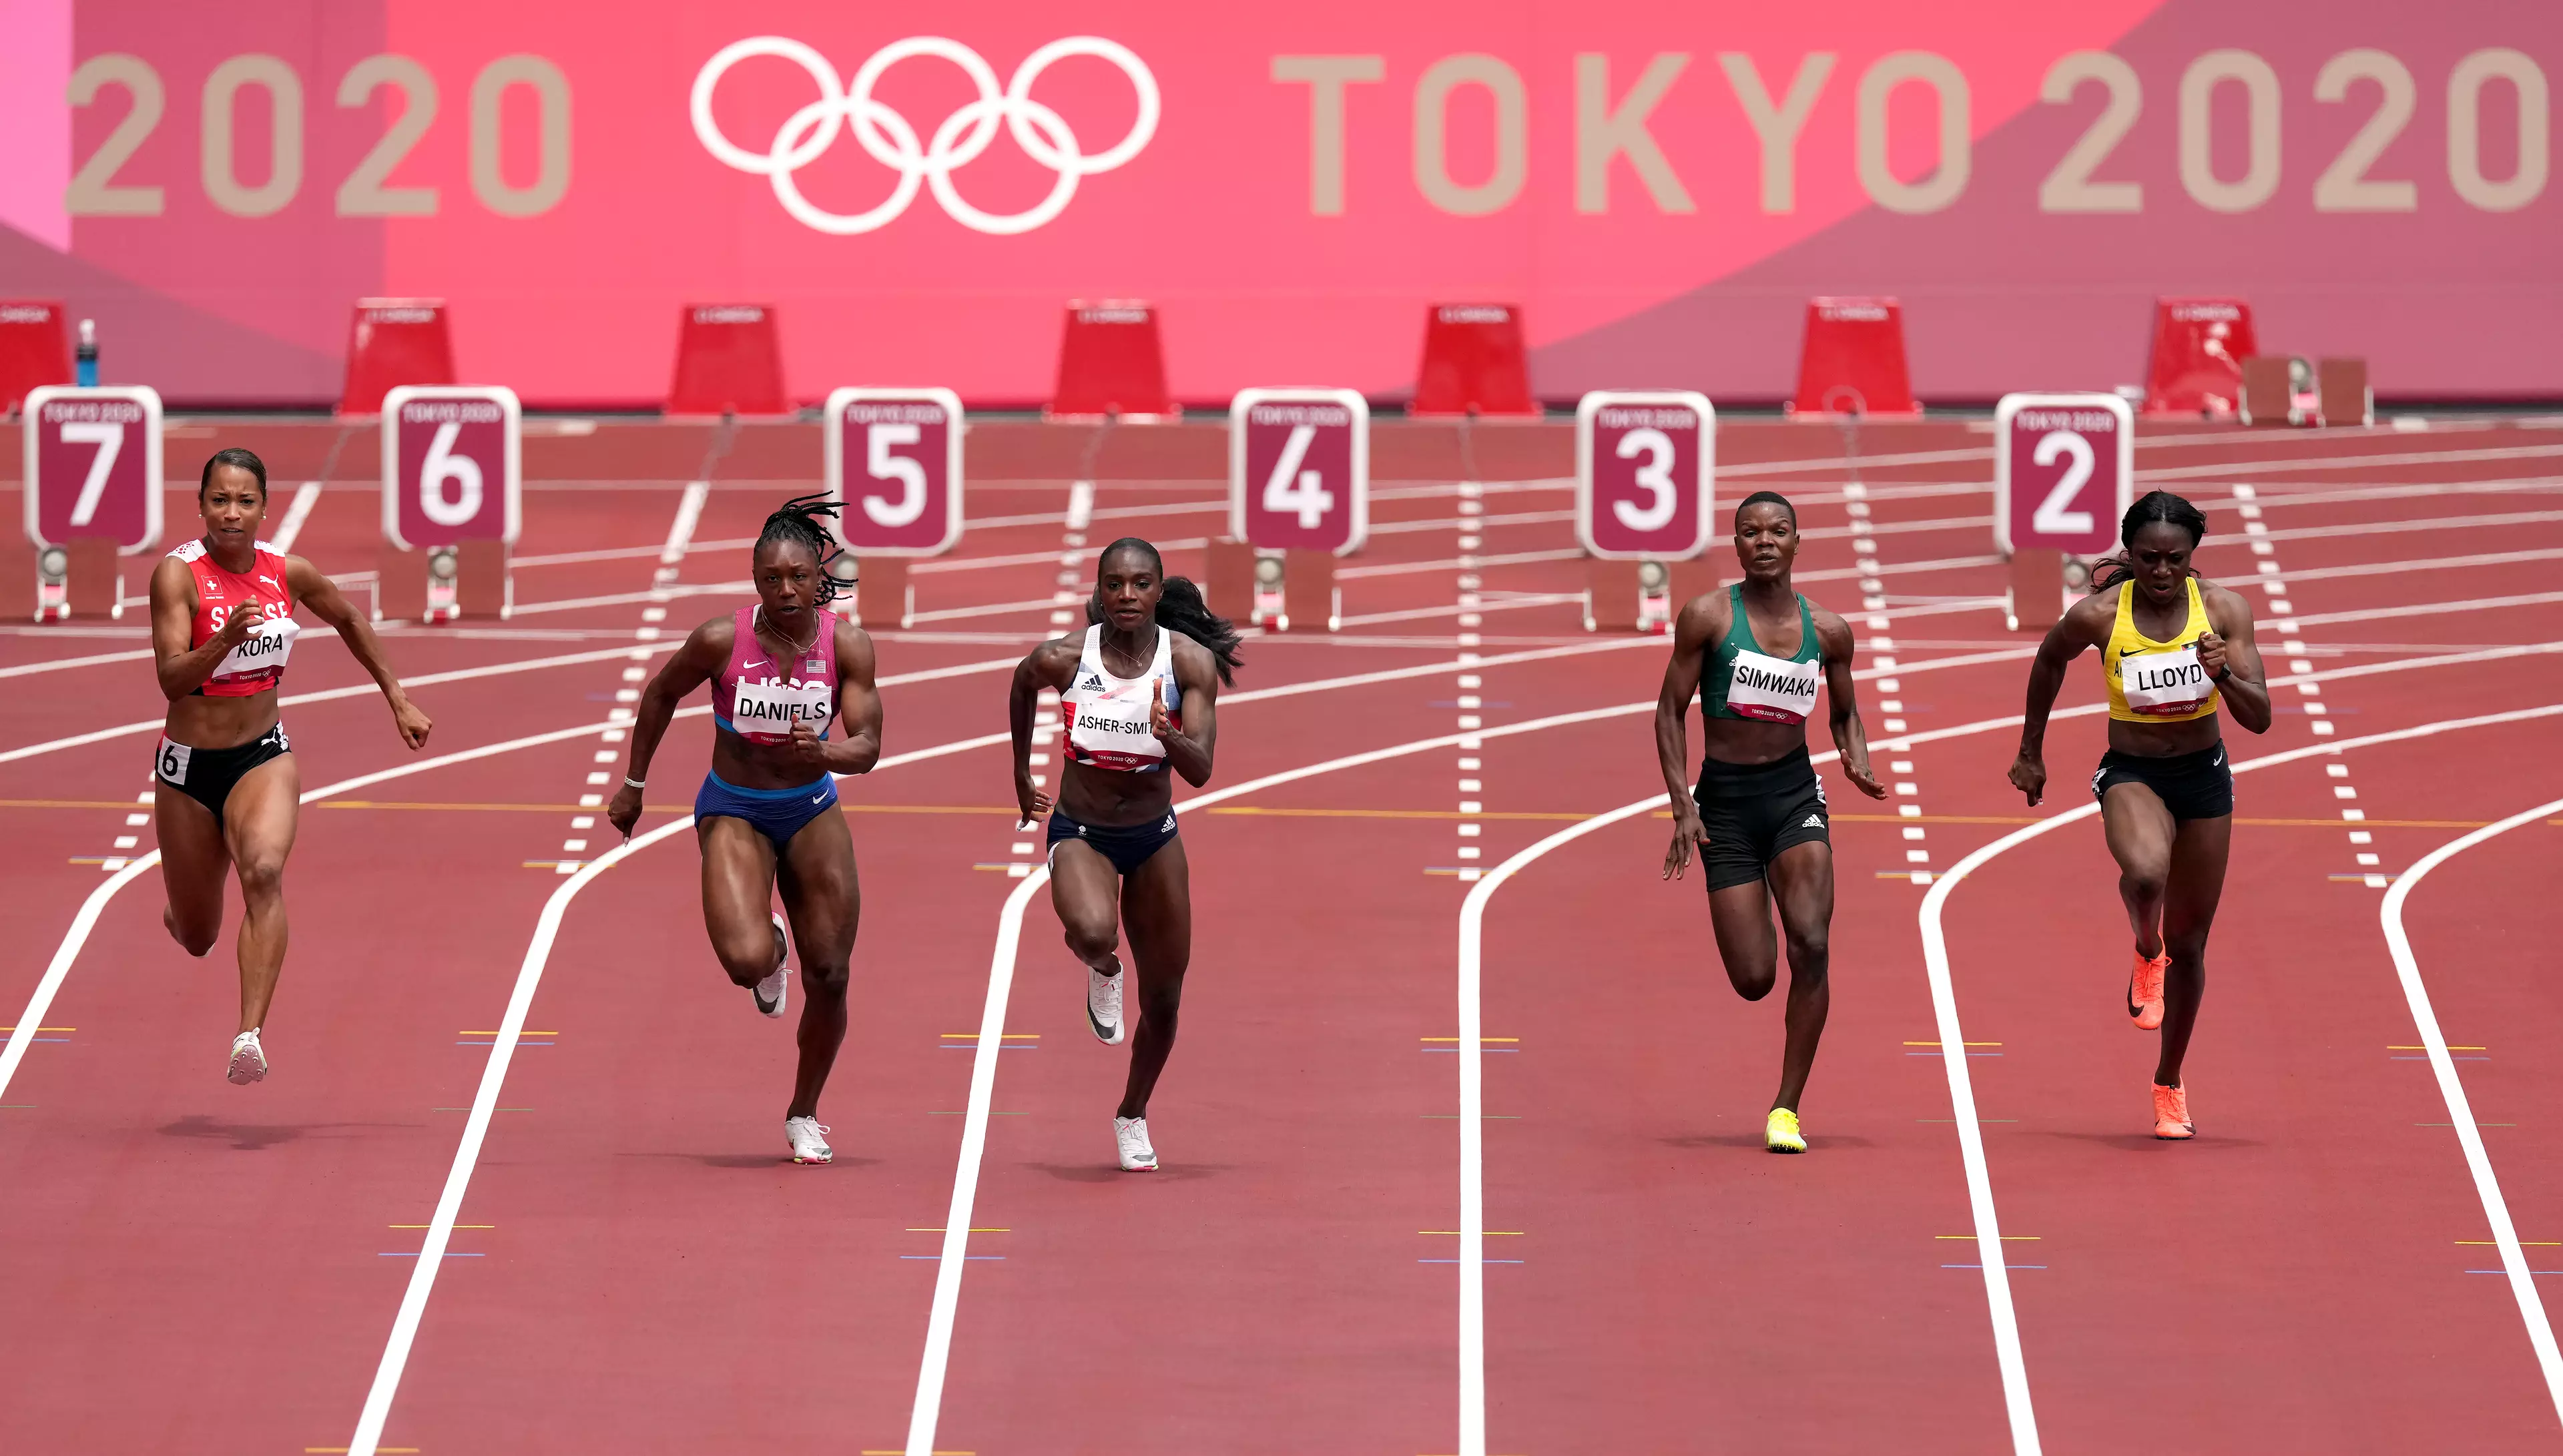 Dina Asher-Smith in the Tokyo 2020 Women's 100m heats on Friday 30th July 2021. (